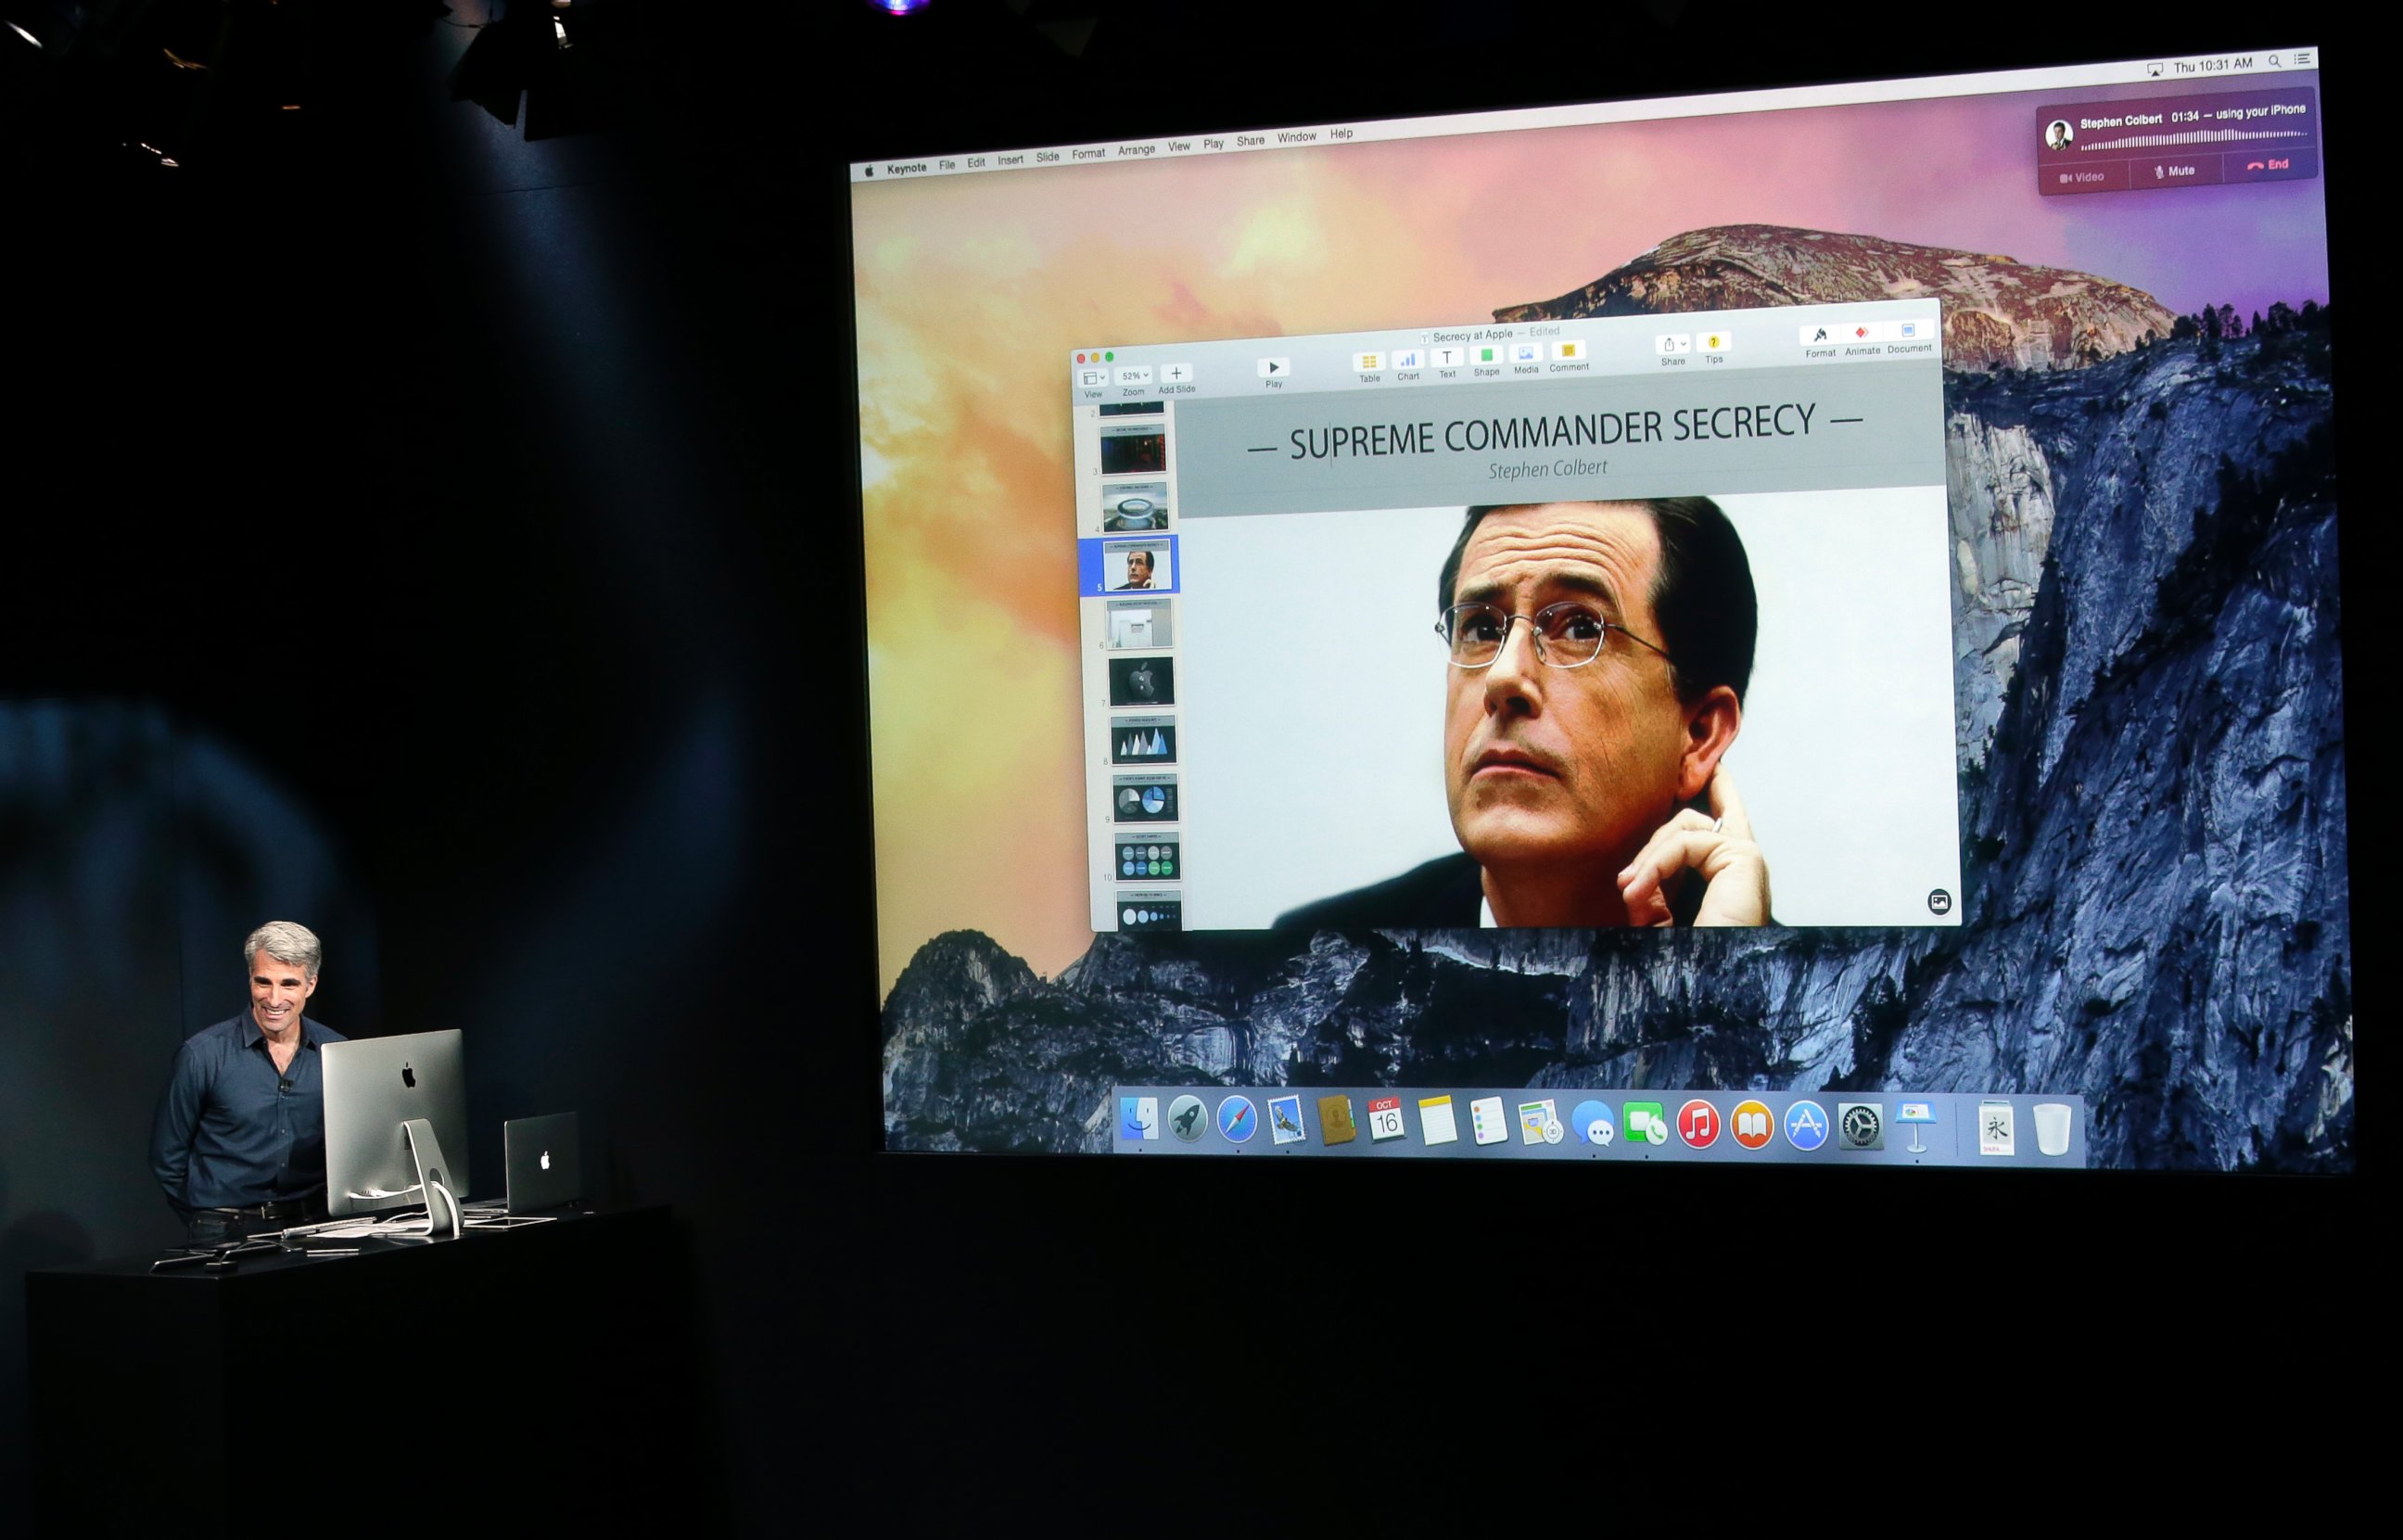 PHOTO: Craig Federighi, senior vice president of Software Engineering at Apple, far left, has a video chat with Stephen Colbert as he discusses the new operating system update during an event at Apple headquarters on Oct. 16, 2014 in Cupertino, Calif. 